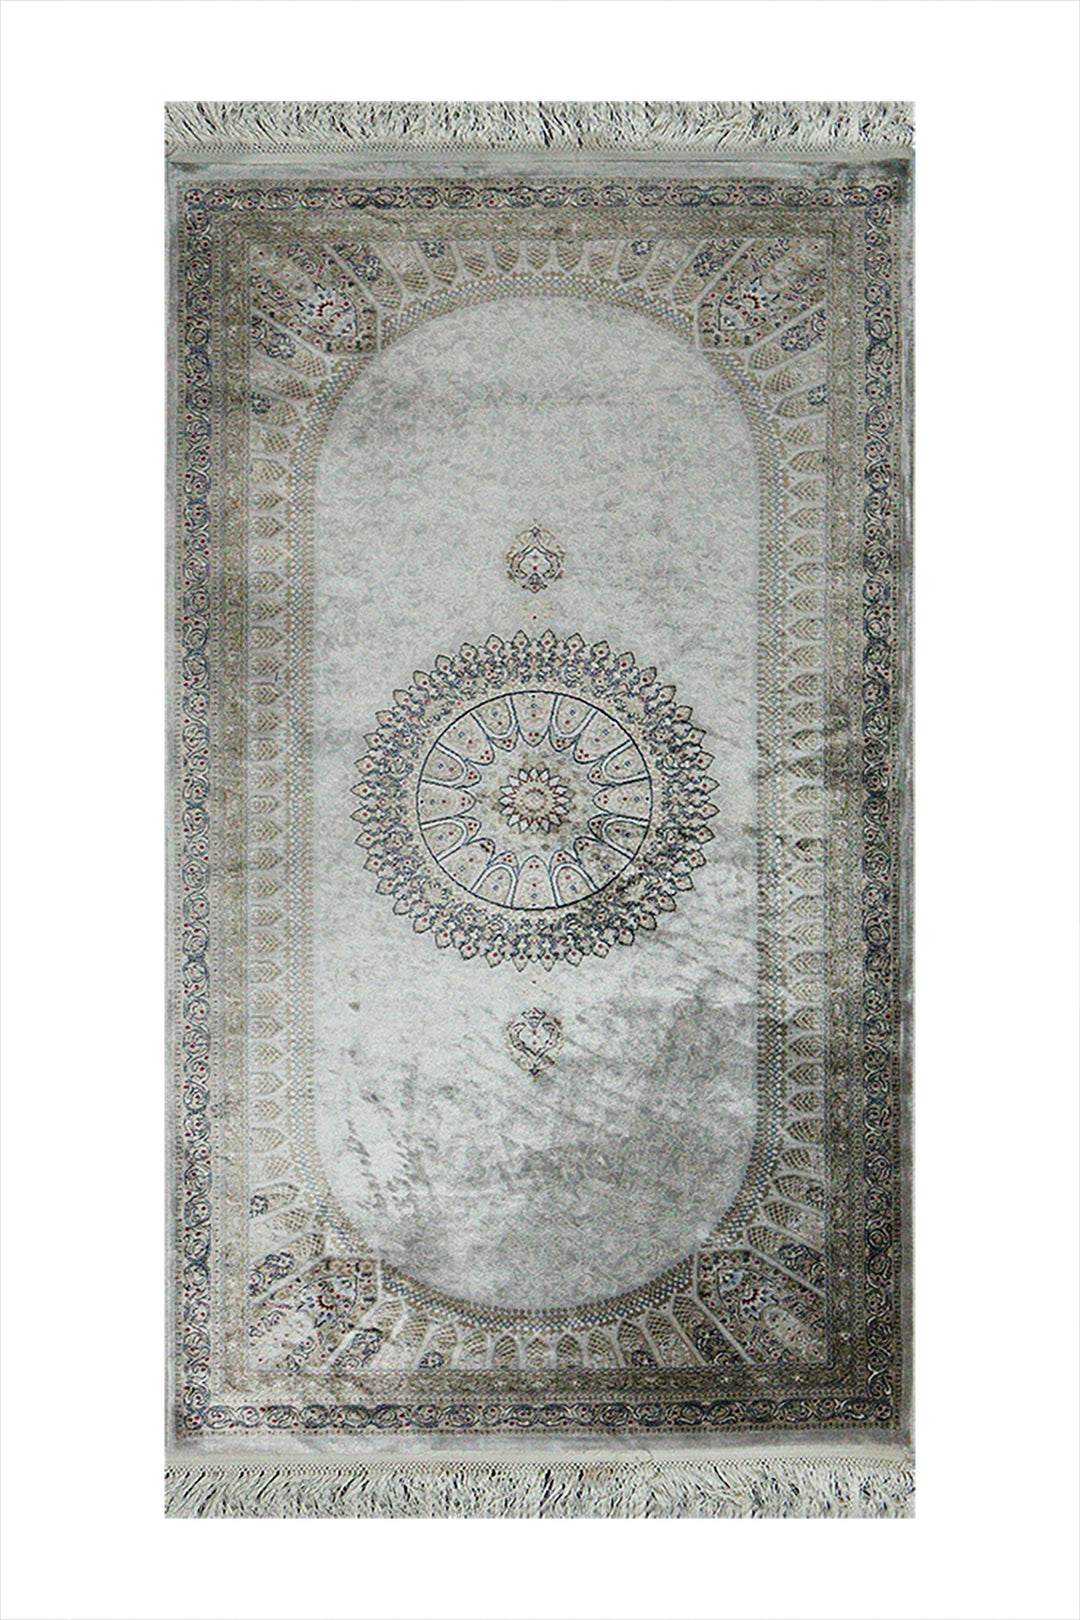 Turkish Premium  Ottoman Rug - Gray - 2.6 x 4.9 FT - Resilient Construction for Long-Lasting Use